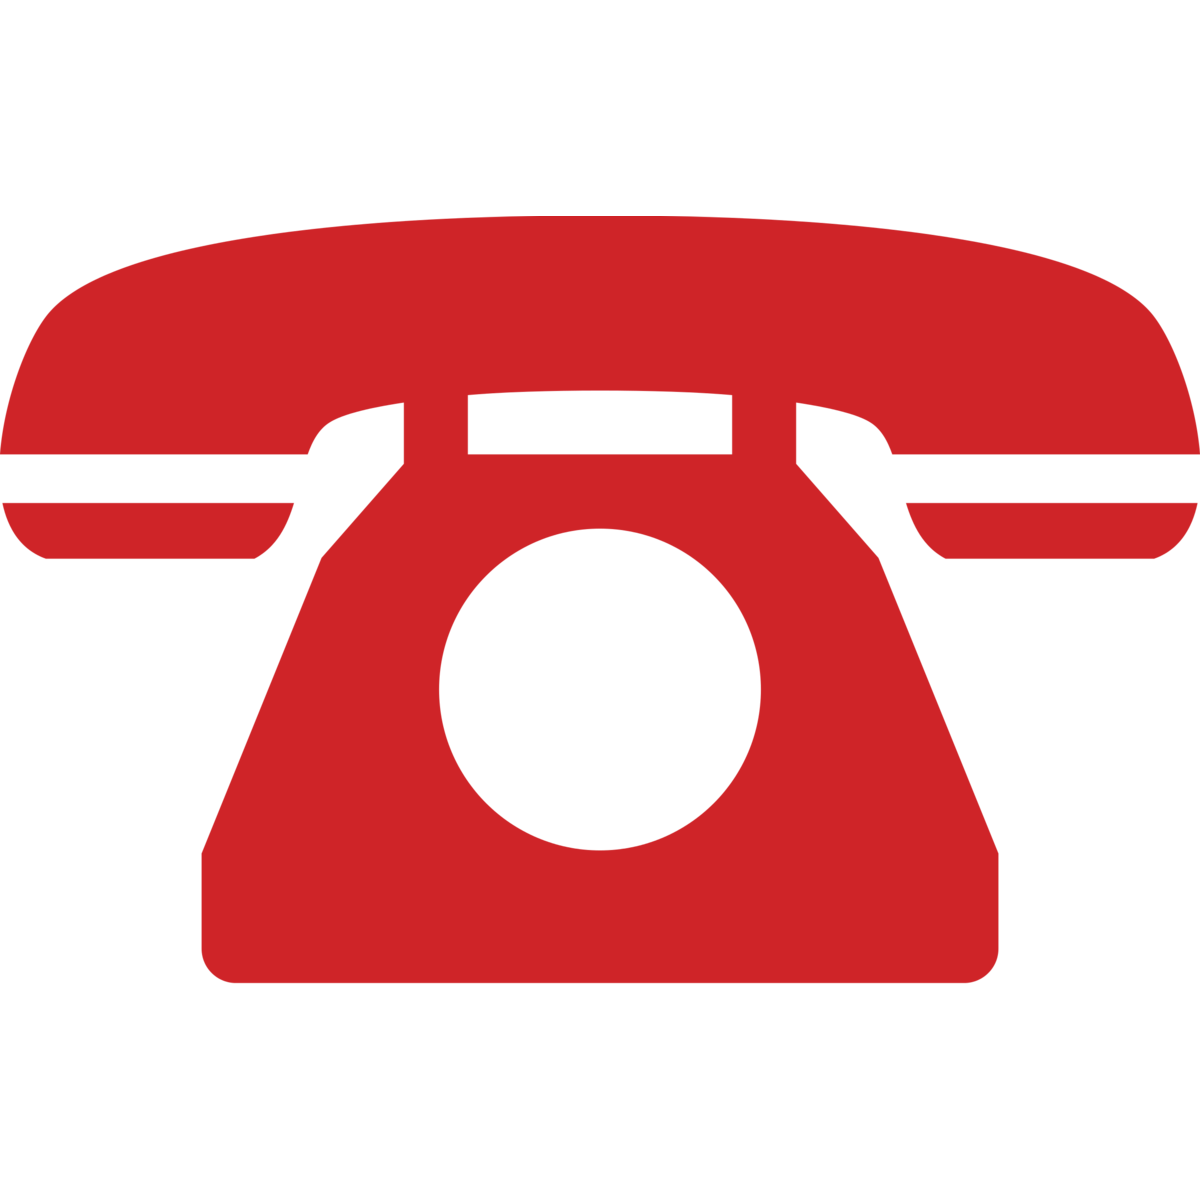 telephone-iconred.png - 47.58 KB